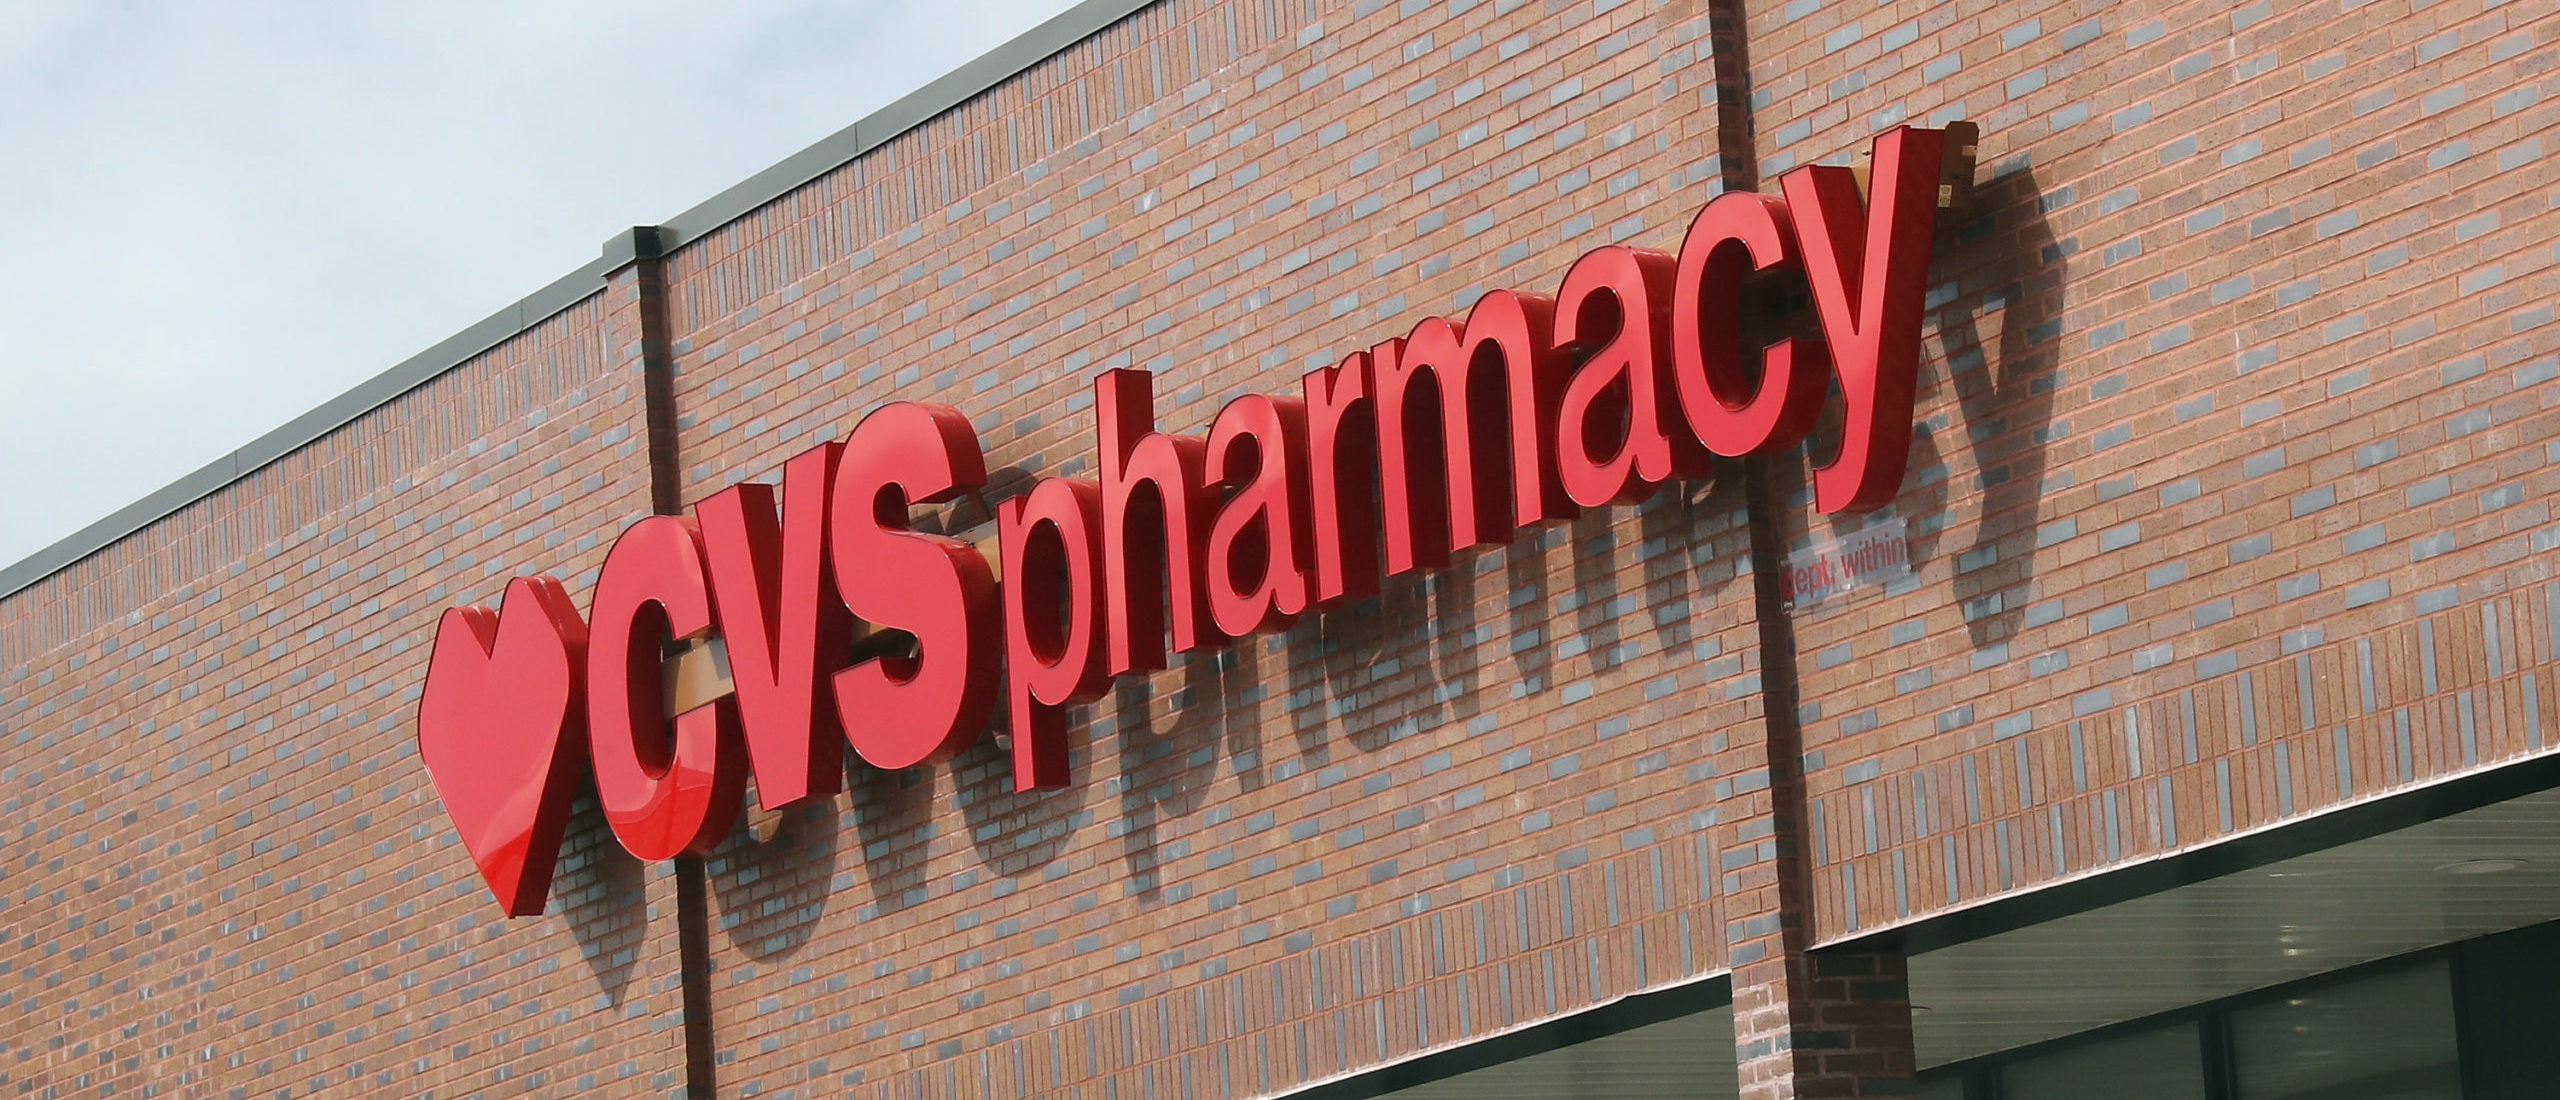 WANTAGH, NEW YORK - MARCH 16: An image of the sign for the CVS Pharmacy as photographed on March 16, 2020 in Wantagh, New York. (Photo by Bruce Bennett/Getty Images)